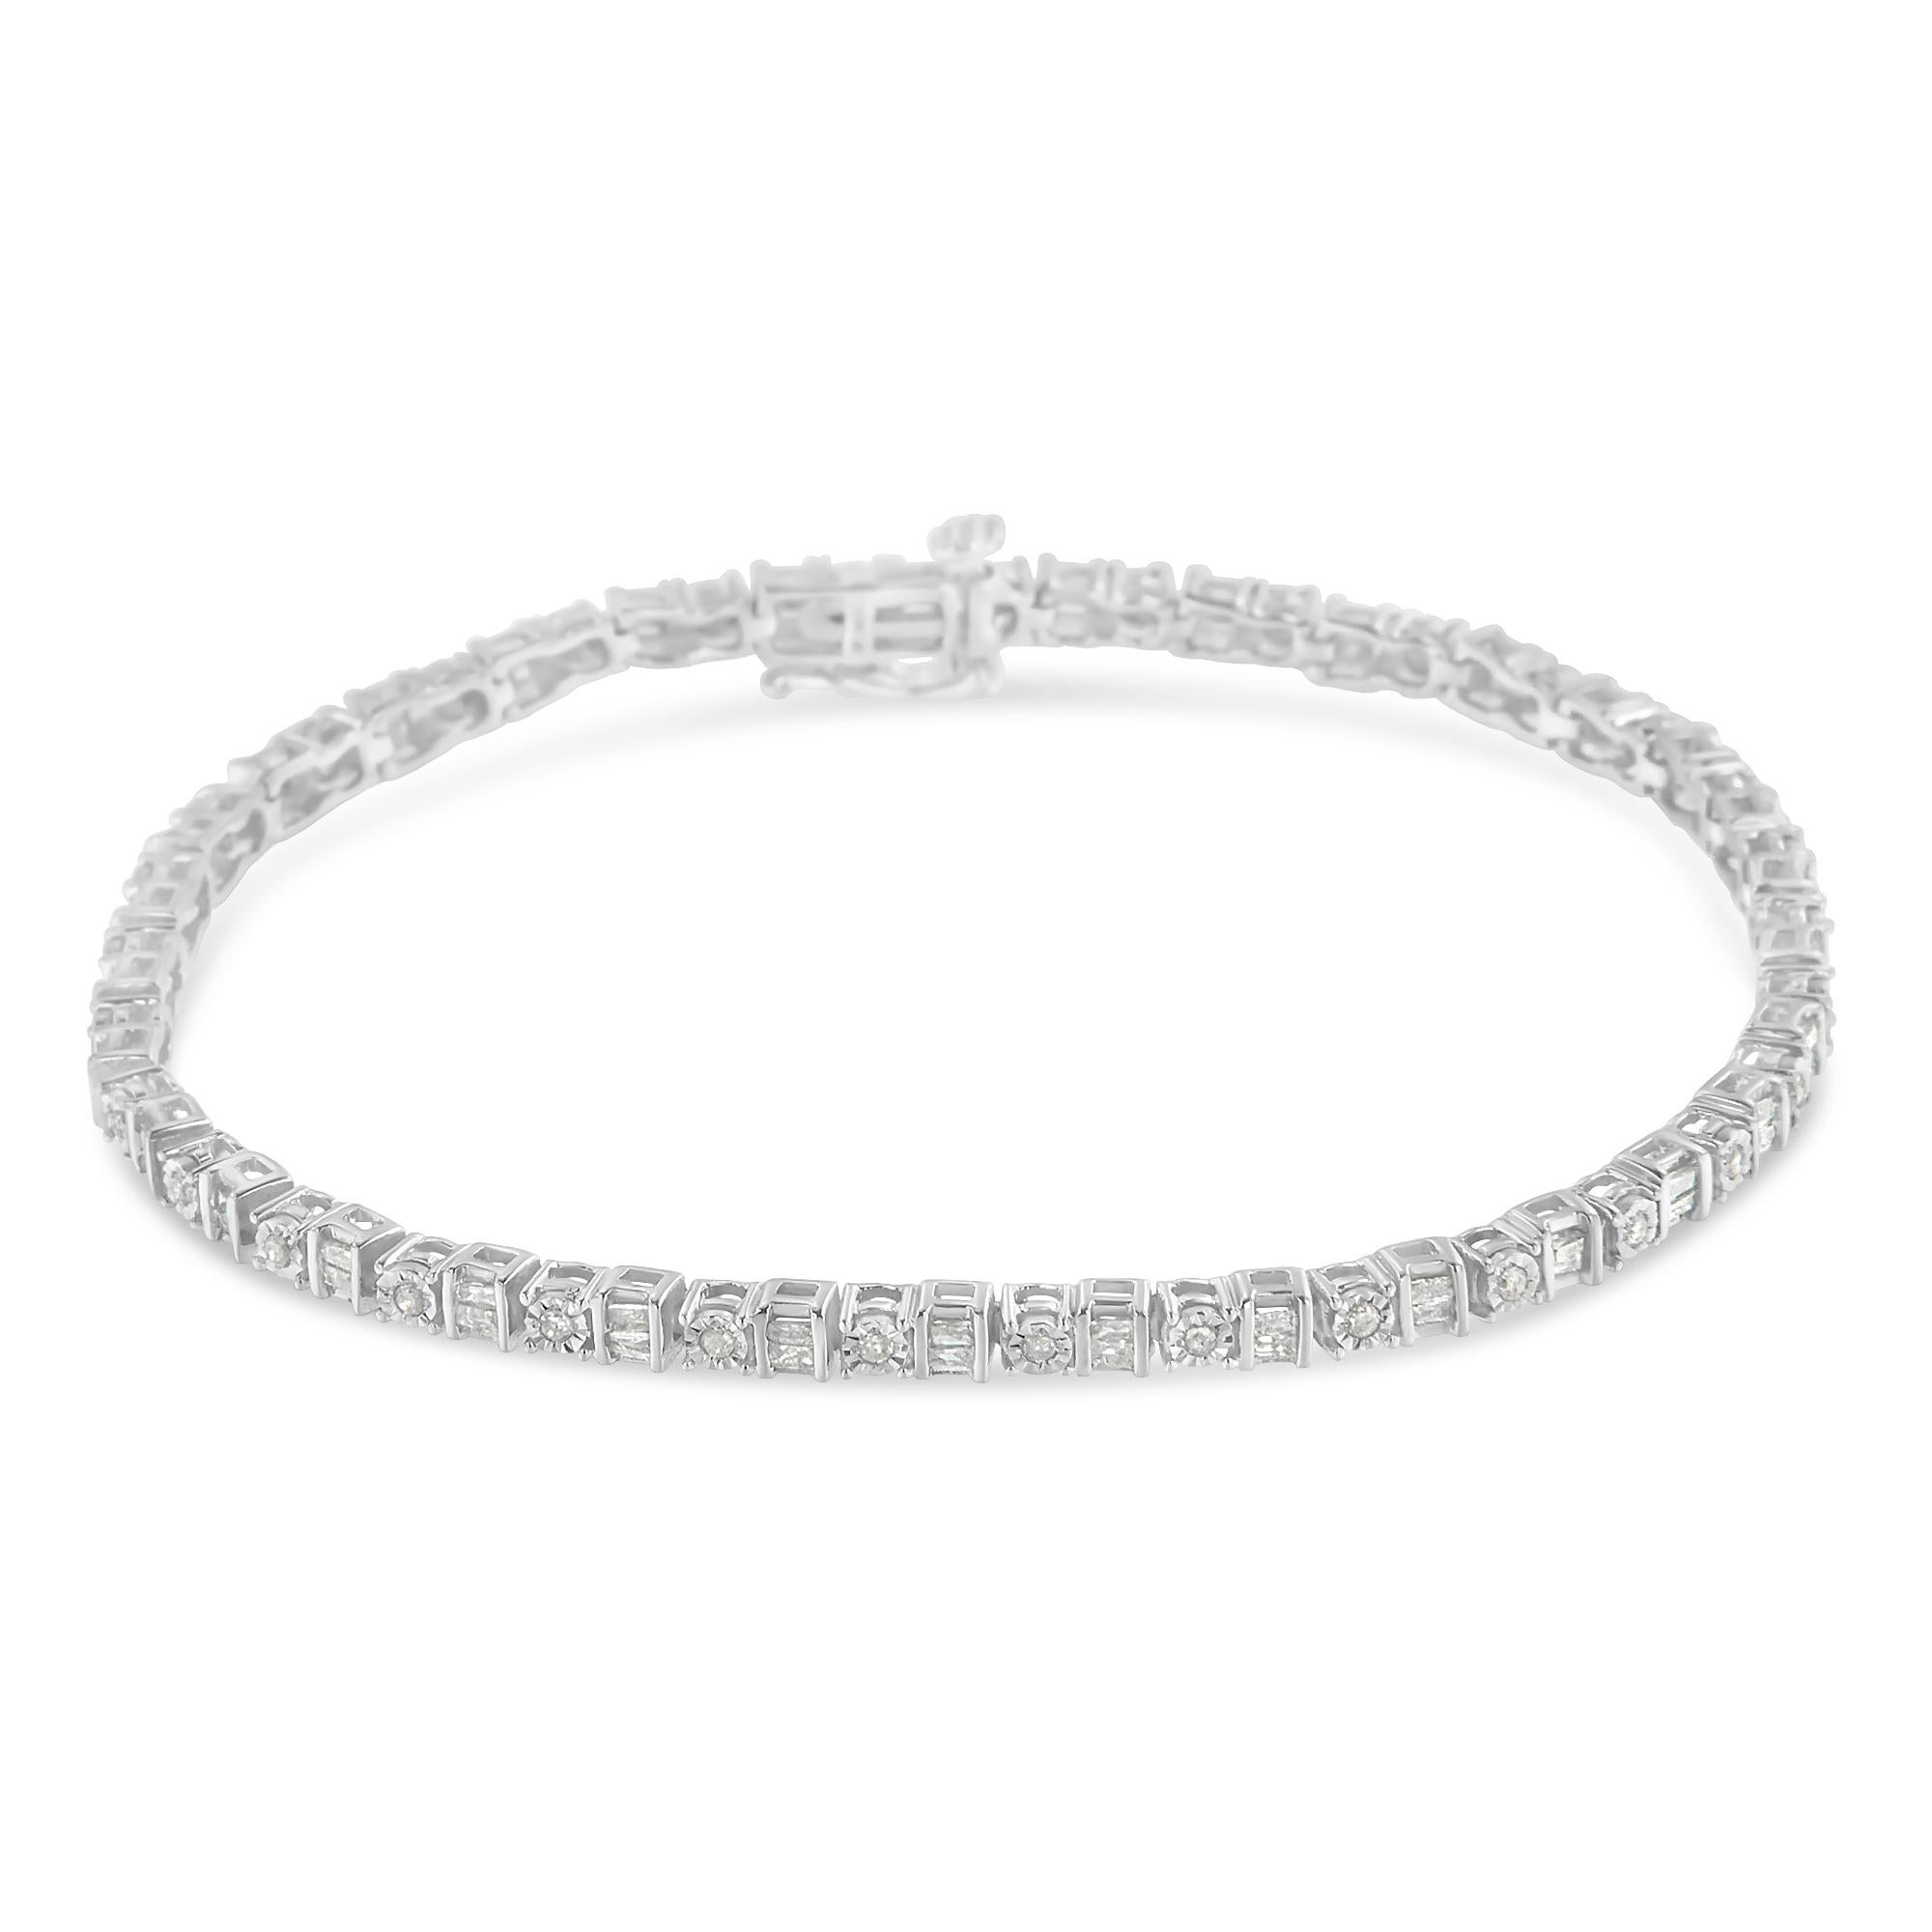 Elegant and timeless, this gorgeous 10 karat white gold bracelet features 1.0 carat total weight of round & baguette cut diamonds. The tennis bracelet features alternating links of a single round diamond in an illusion setting and a channel link set